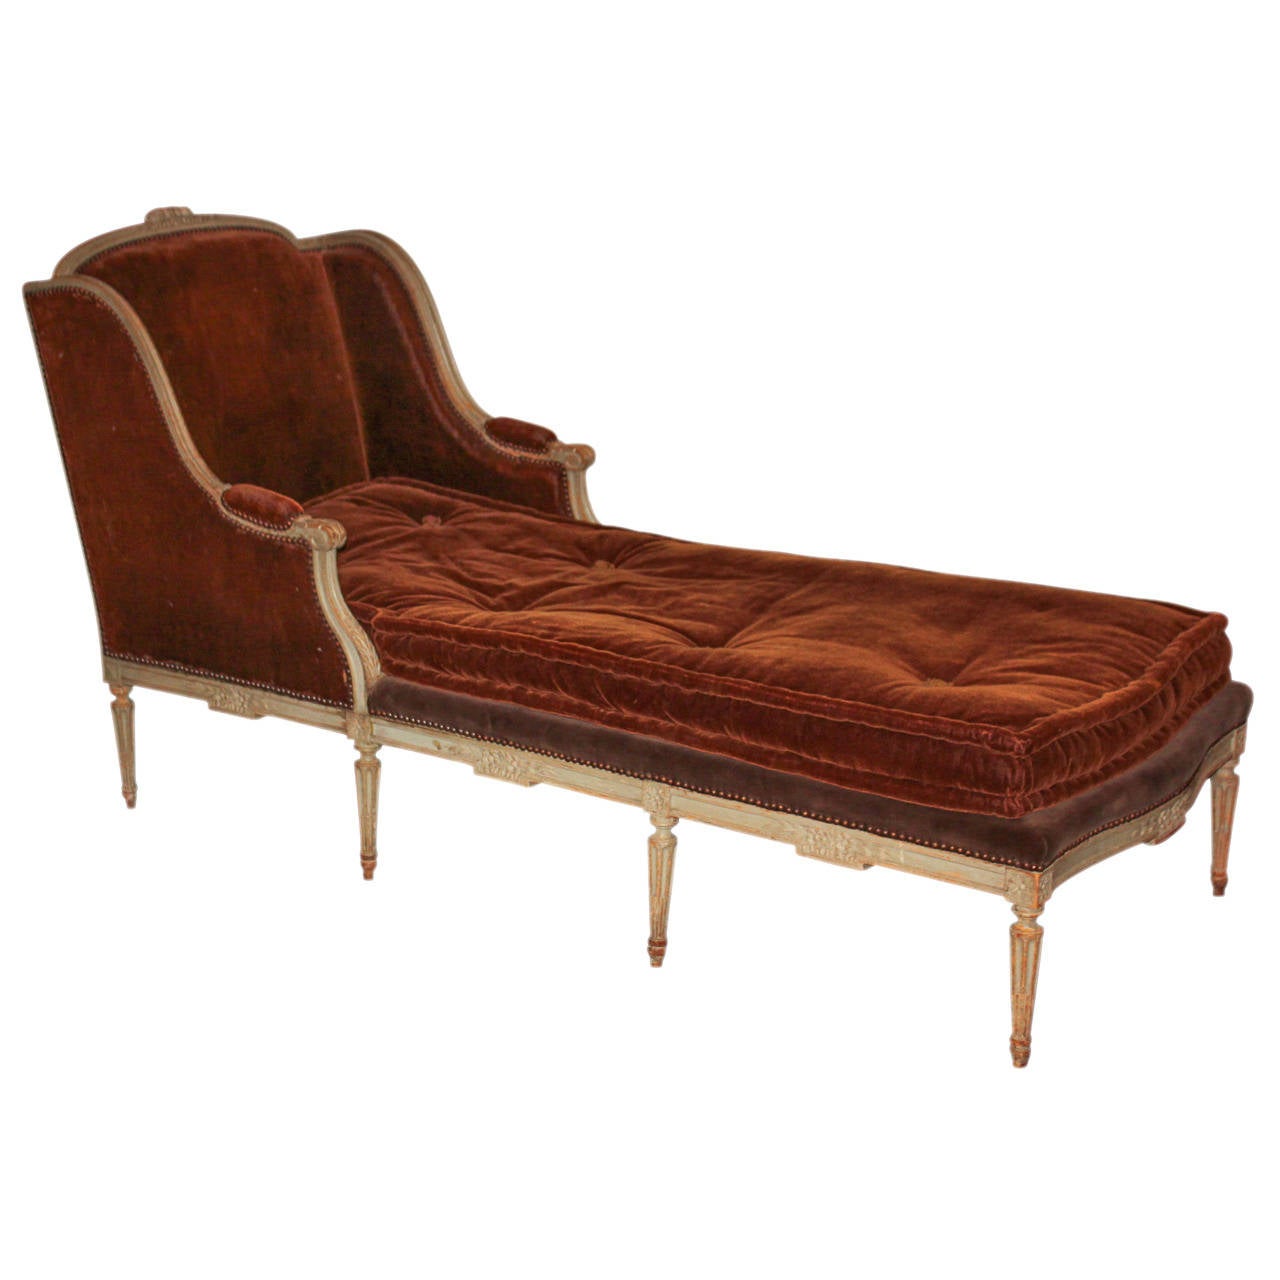 19th C French Louis Xvi Chaise Longue For Sale At 1stdibs throughout Amazing and Lovely chaise longue luis xvi intended for Your property